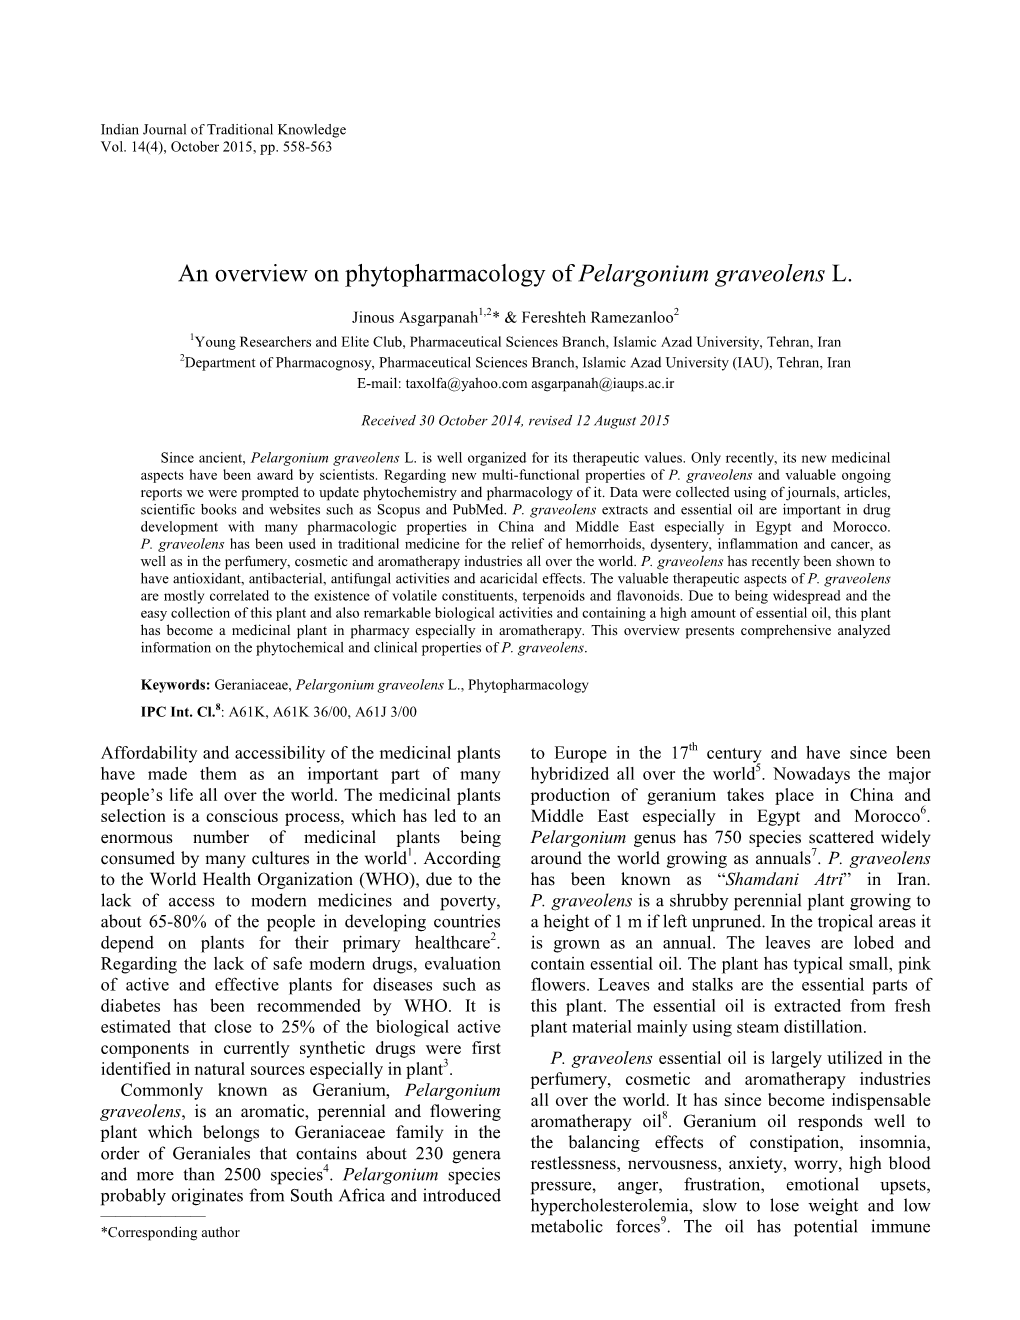 An Overview on Phytopharmacology of Pelargonium Graveolens L